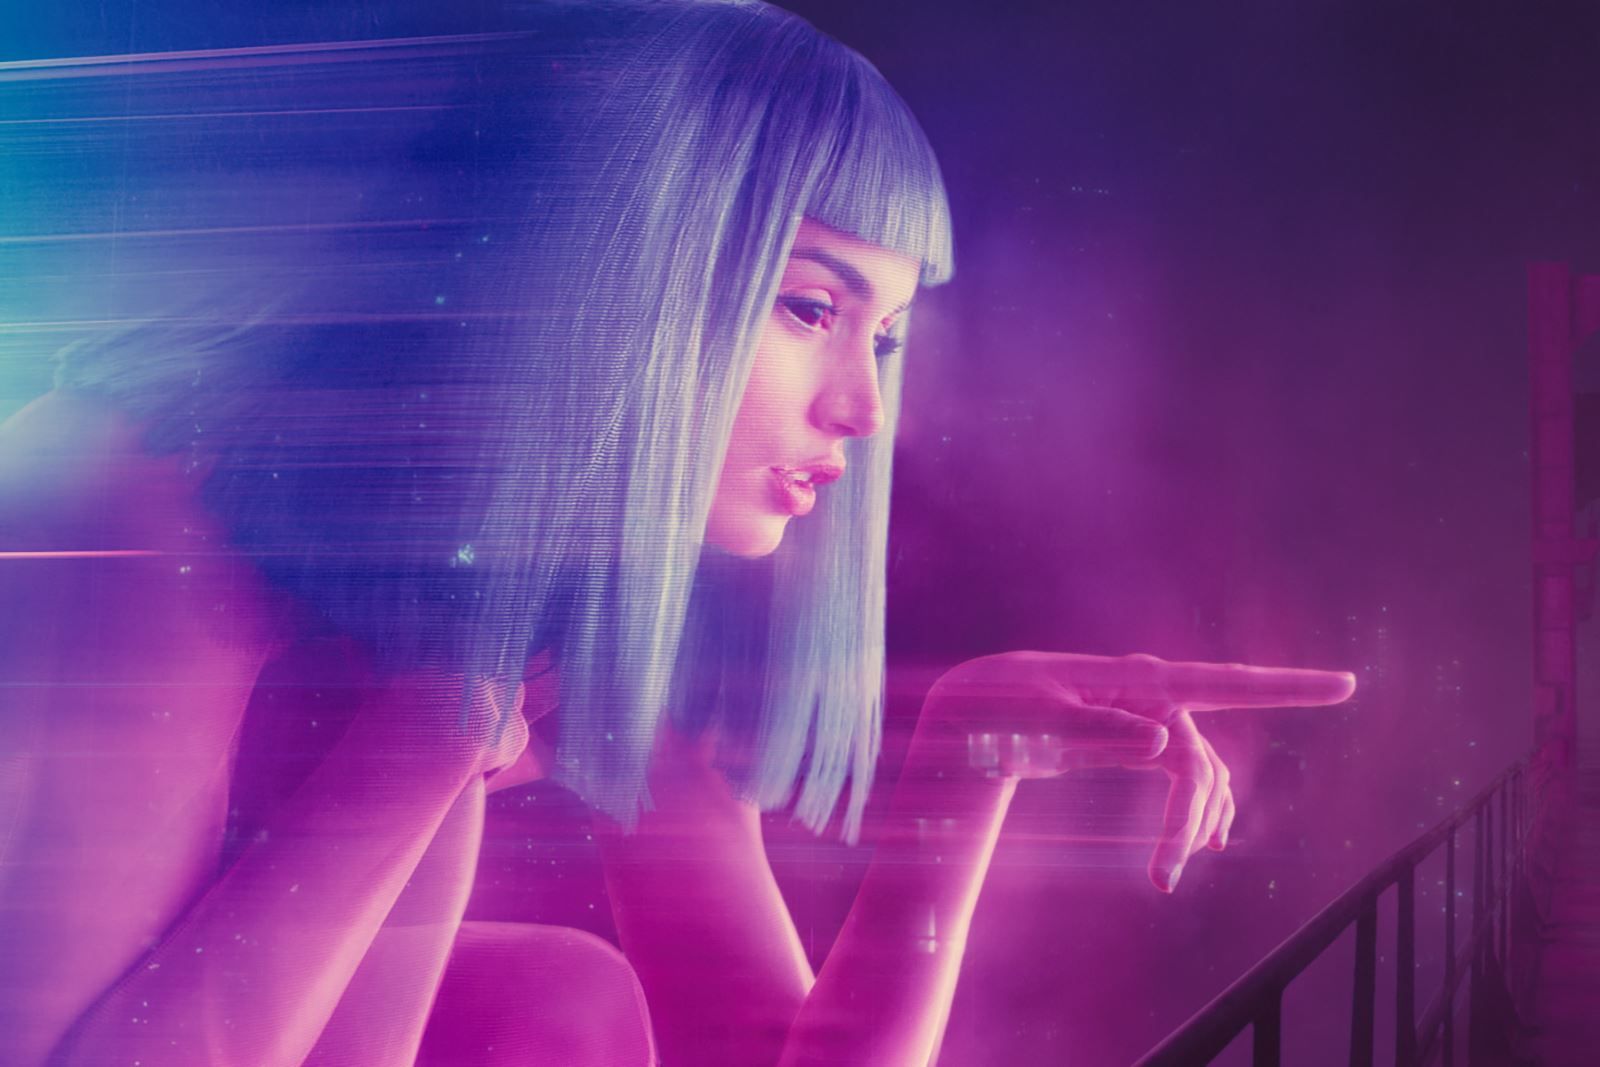 Blade Runner 2099: Here's what we know so far about the Blade Runner TV series photo 1